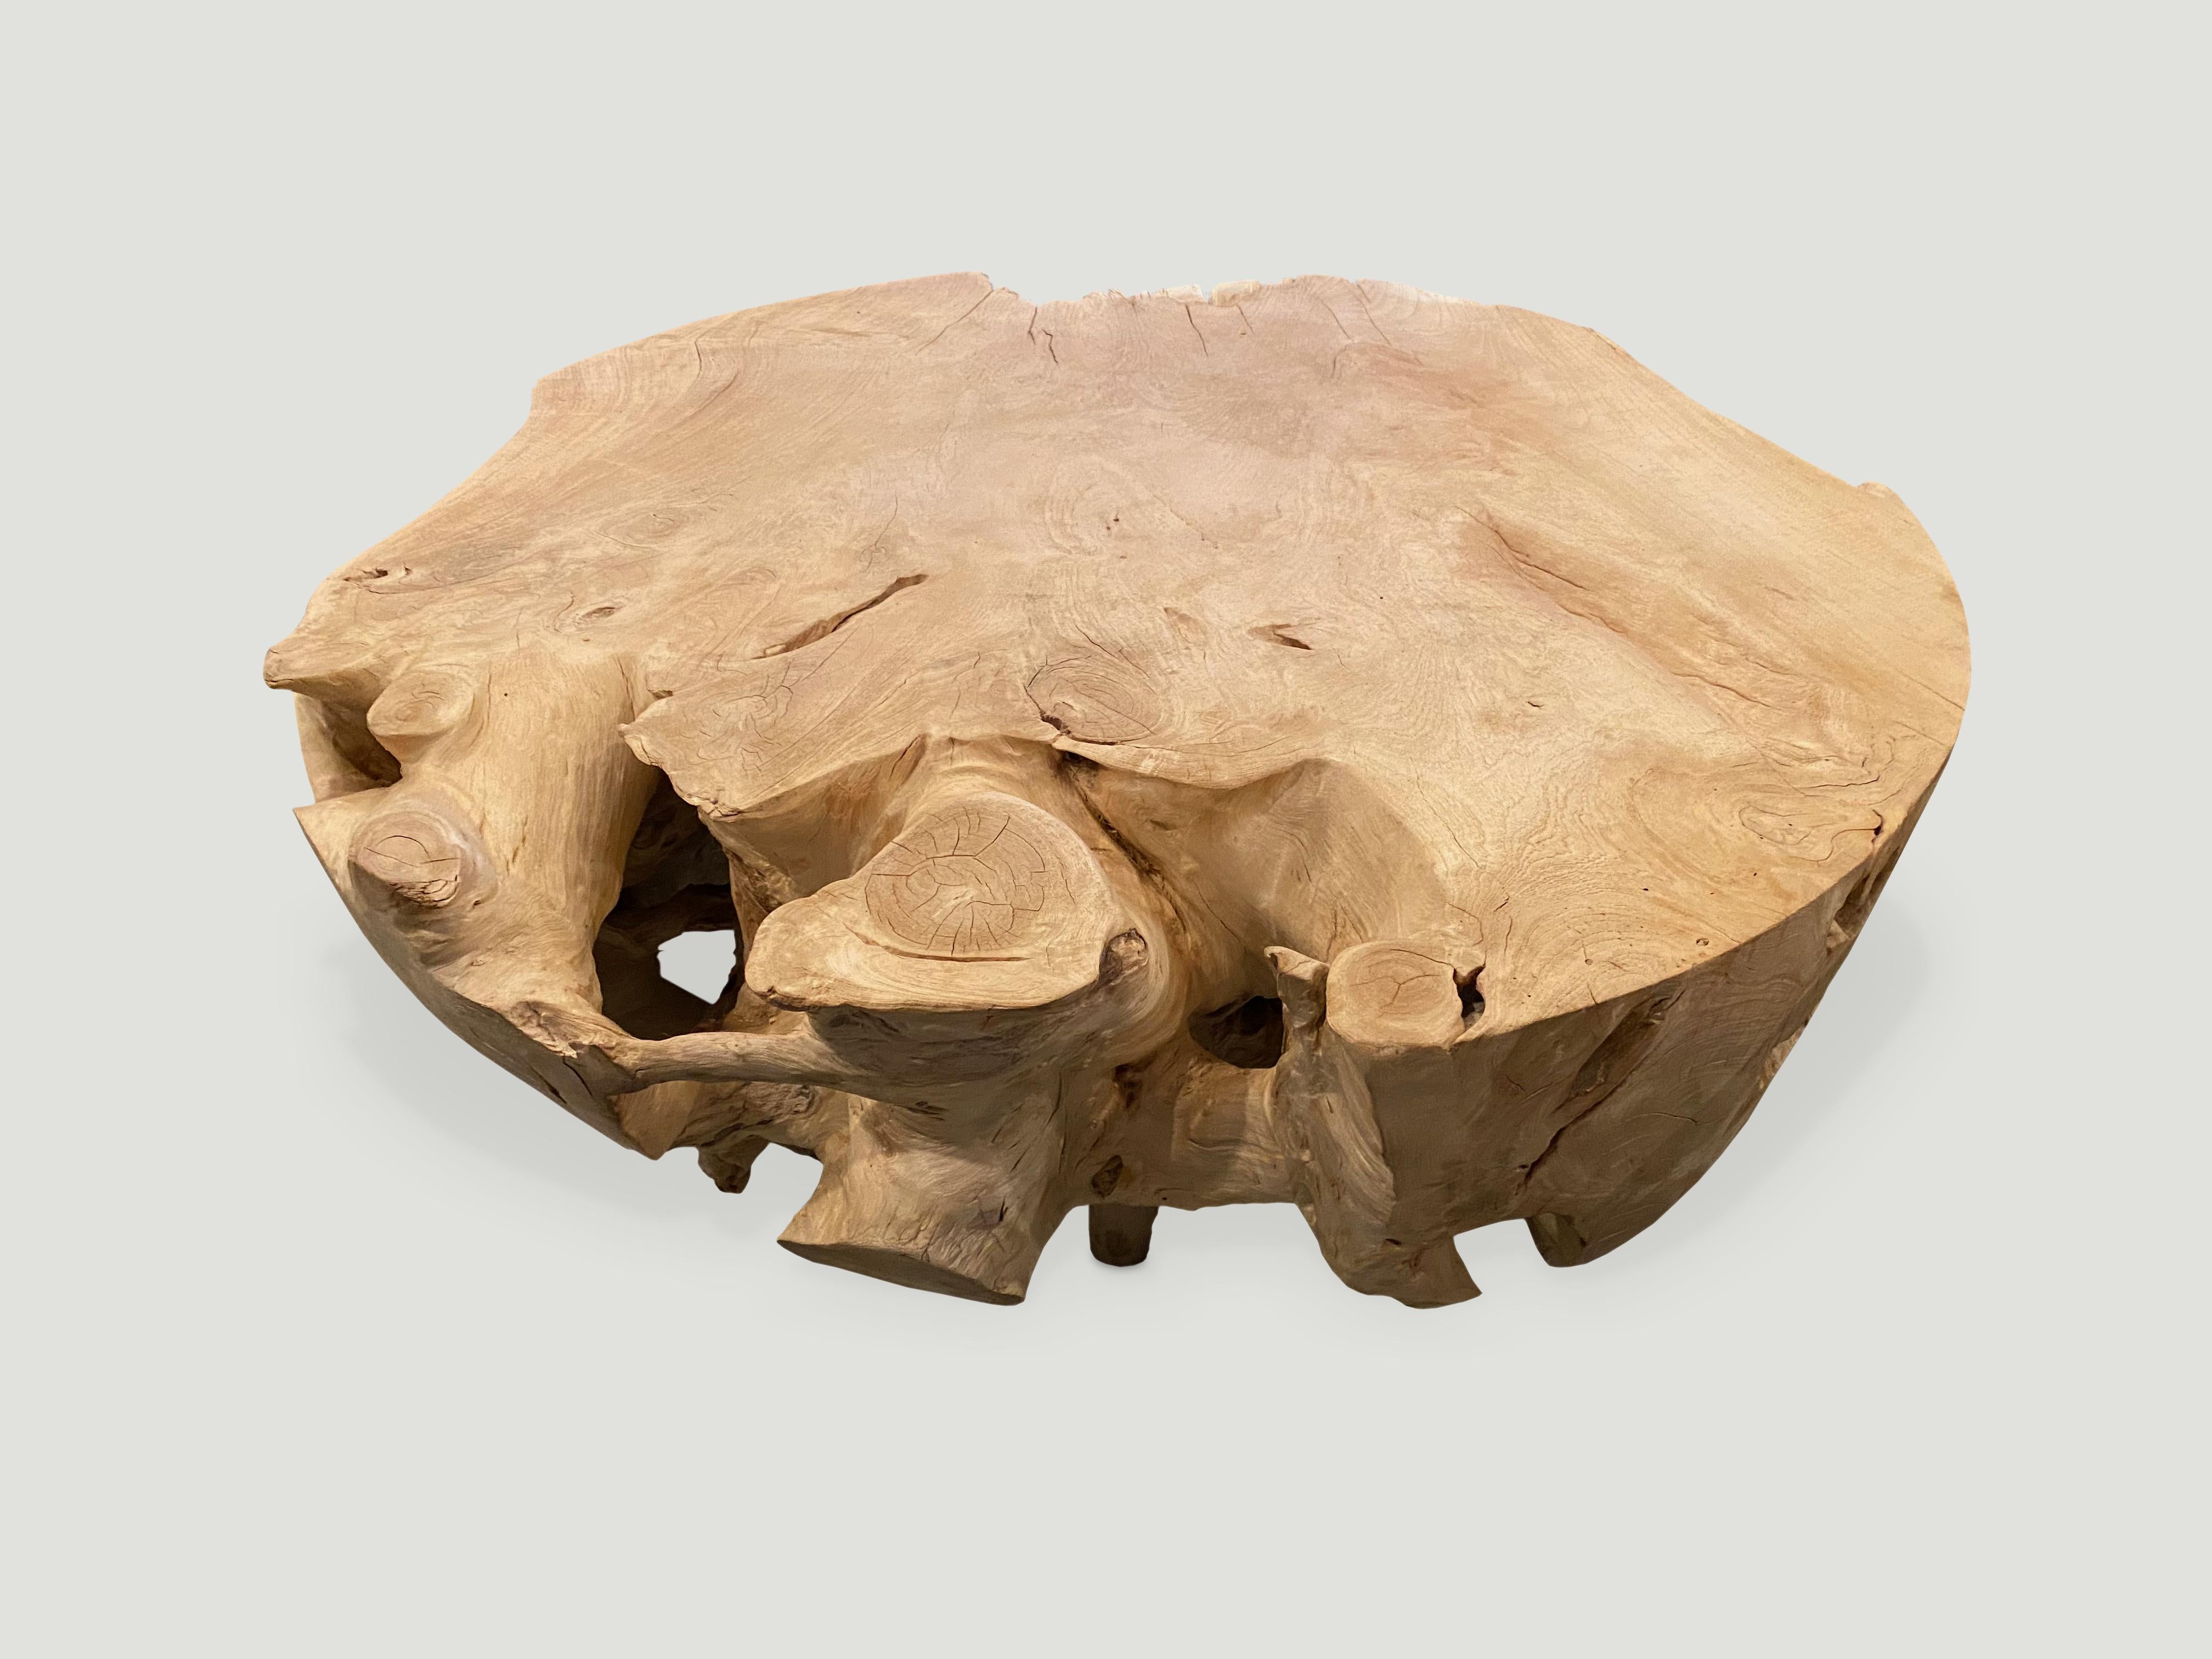 Organic round reclaimed bleached teak coffee table. Perfect for inside or outside living. We can also produce this shape charred or natural teak.

The St. Barts Collection features an exciting new line of organic white wash and natural weathered